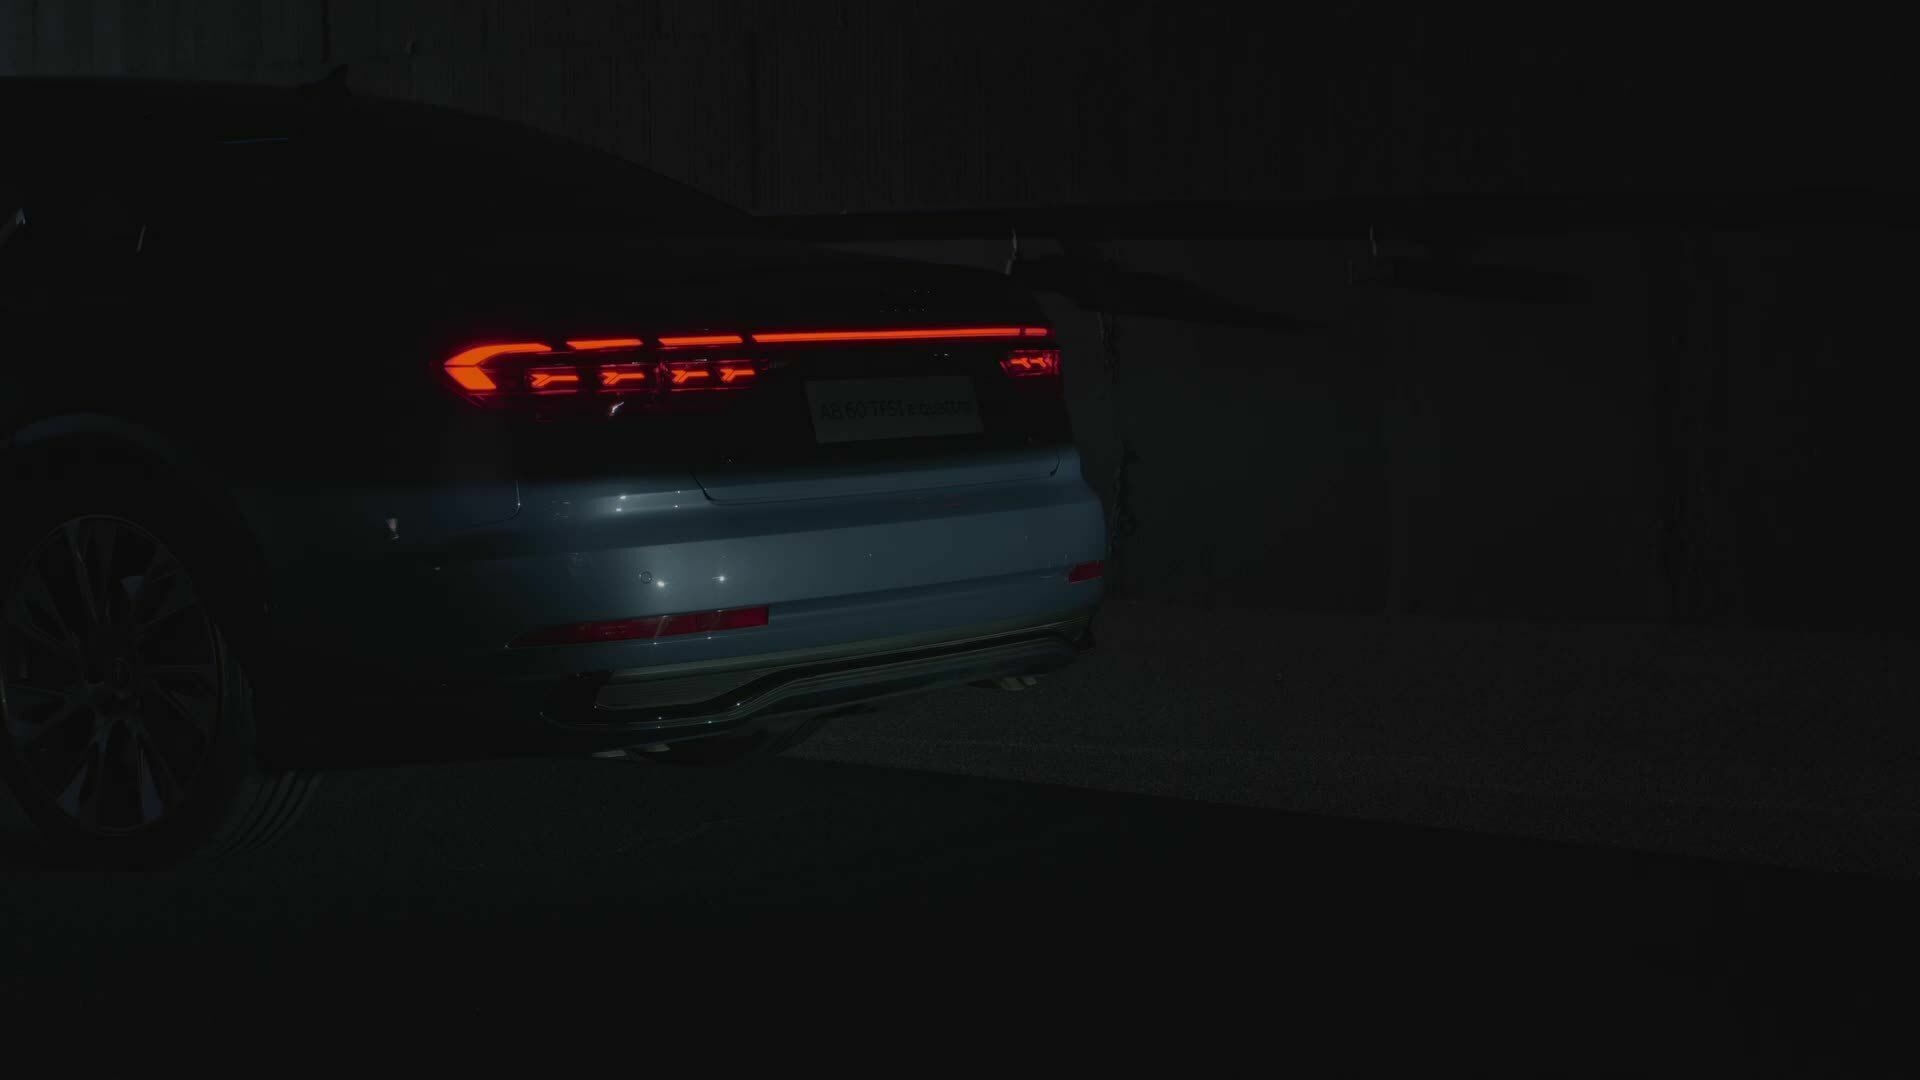 Proximity indication in the Audi A8